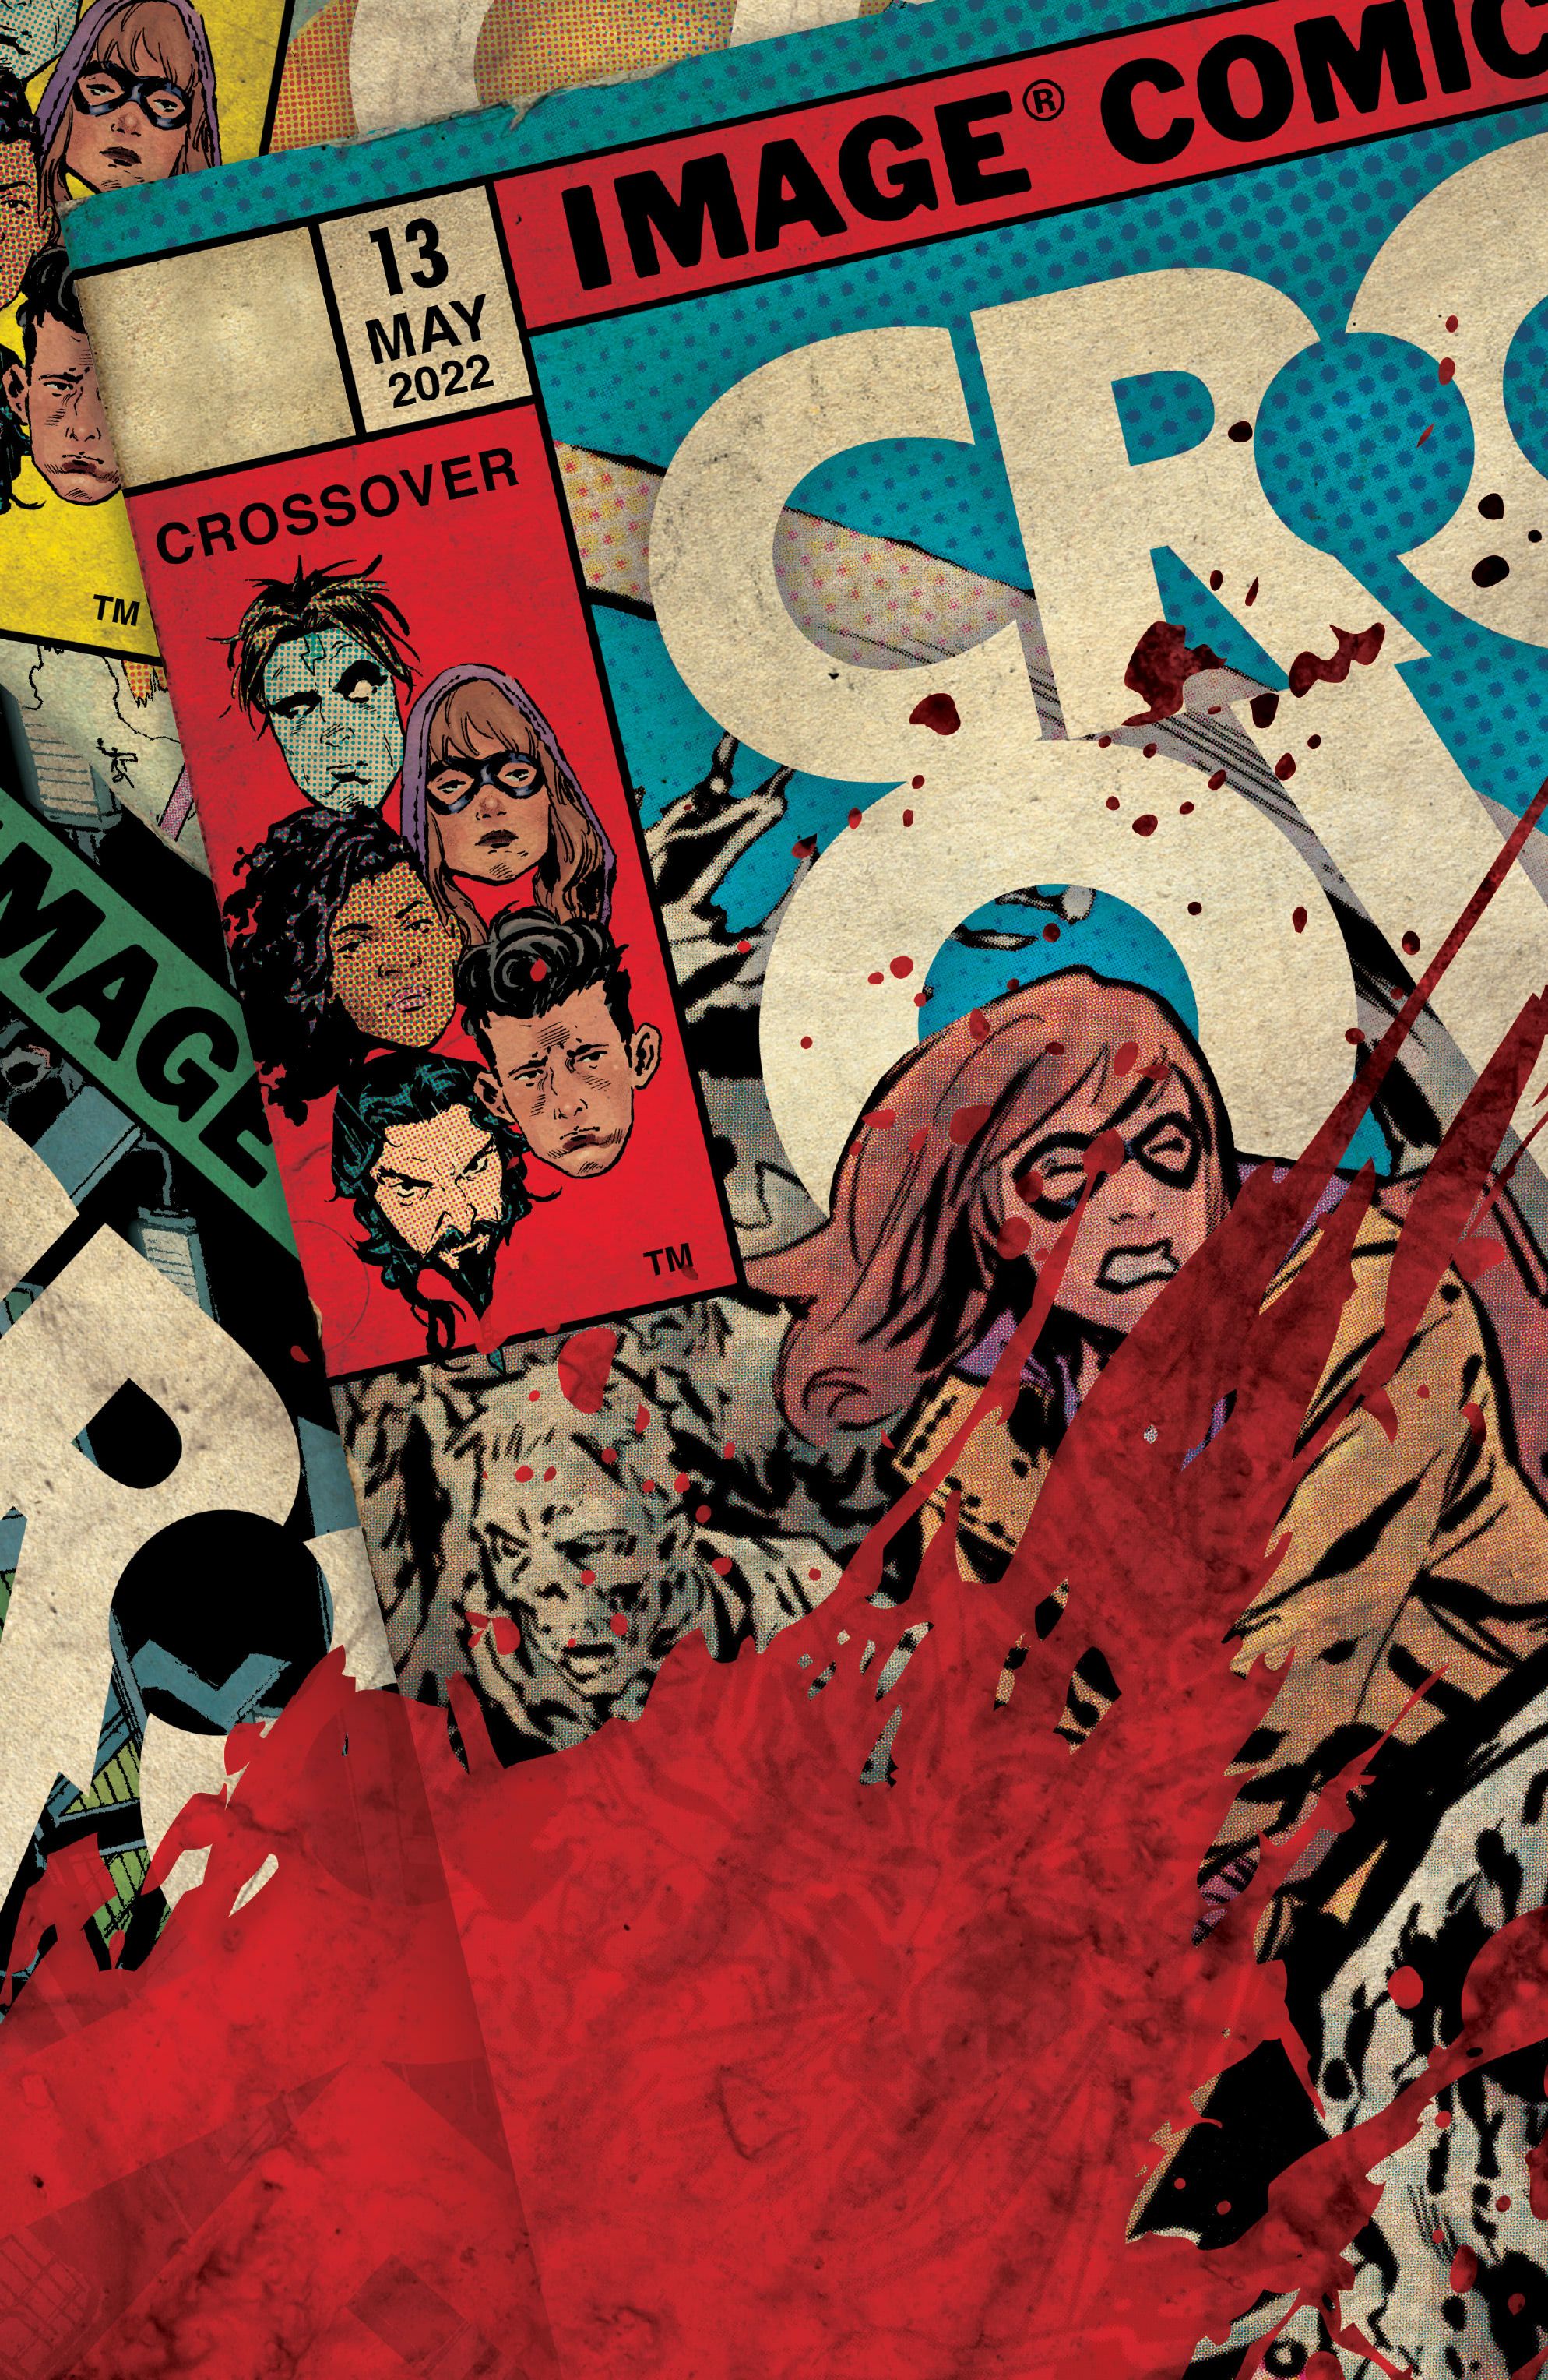 Cover of Crossover #13 